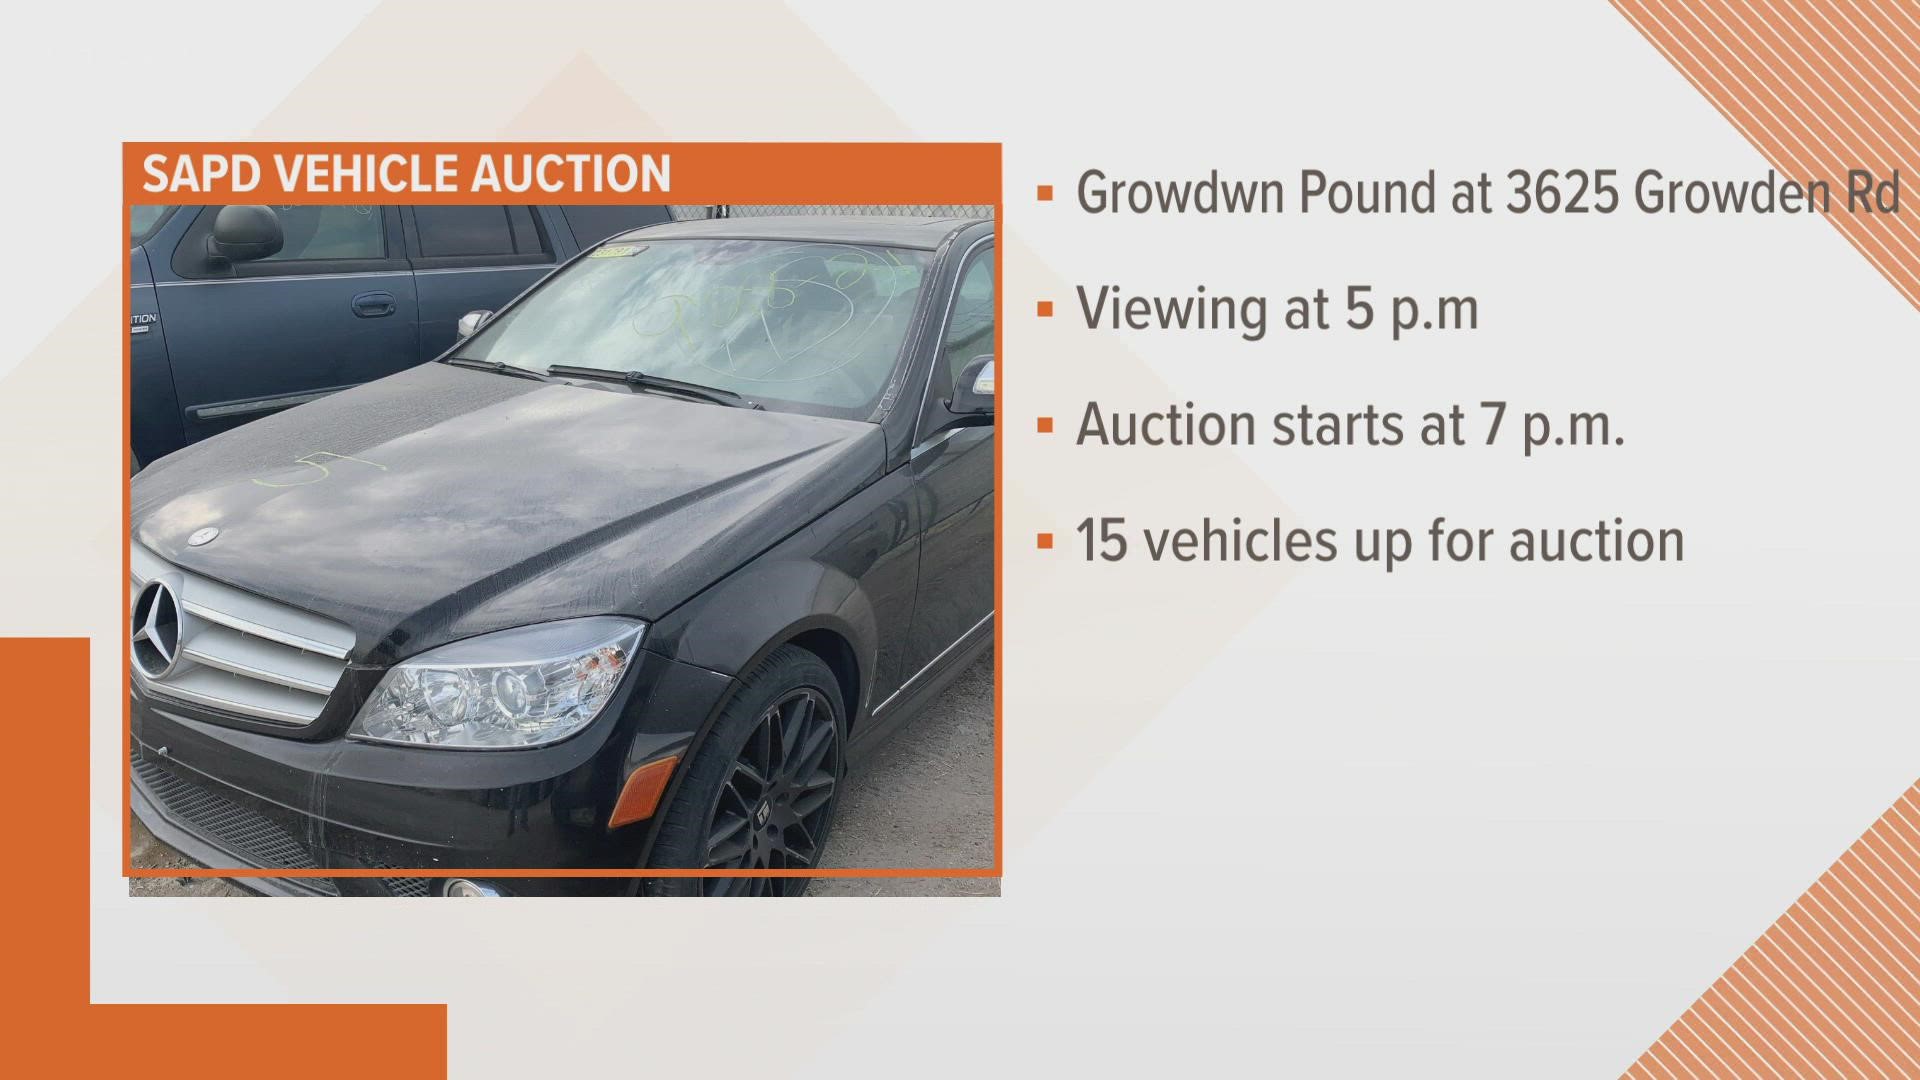 Some of the vehicles up for auction include a Ford Expedition, a Chevy Tahoe, a Dodge Charger, a Nissan Maxima and a Mercedes.